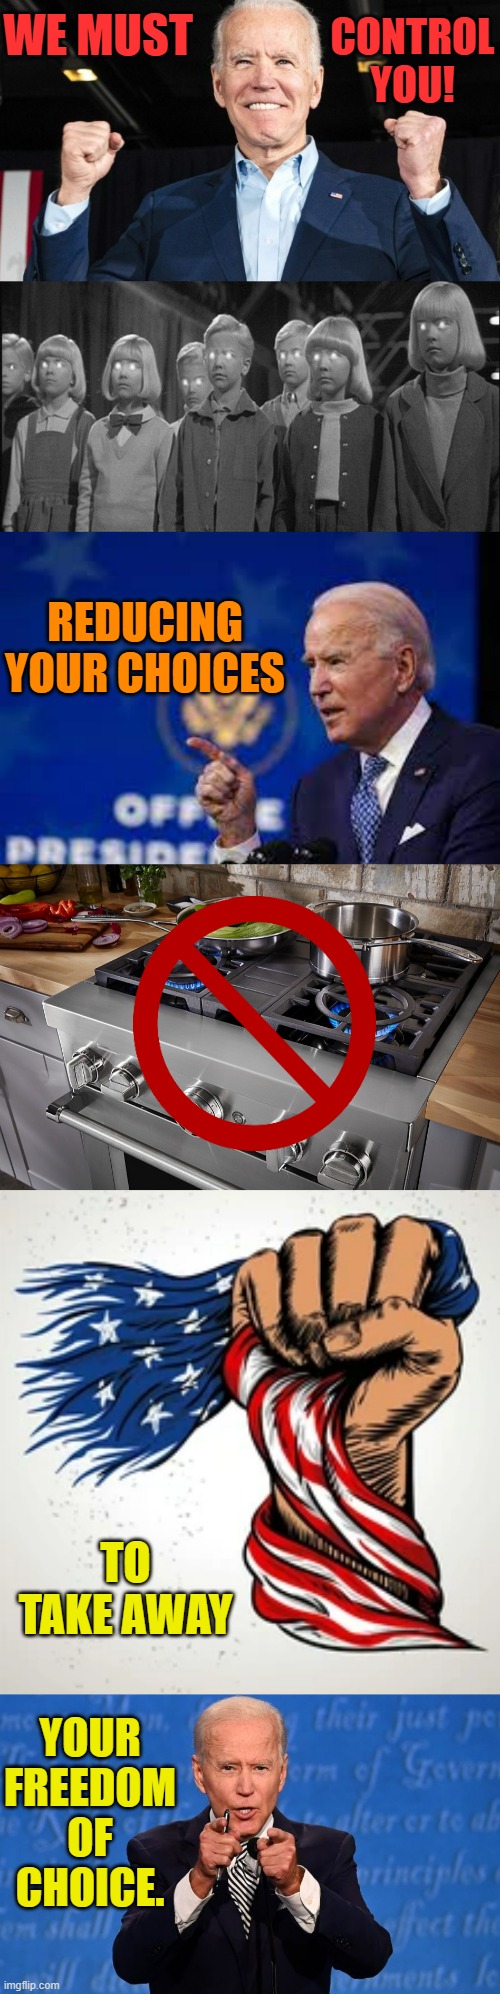 Is This The Real Plan? | CONTROL YOU! WE MUST; REDUCING YOUR CHOICES; TO TAKE AWAY; YOUR FREEDOM OF CHOICE. | image tagged in memes,politics,joe biden,take,away,freedom | made w/ Imgflip meme maker